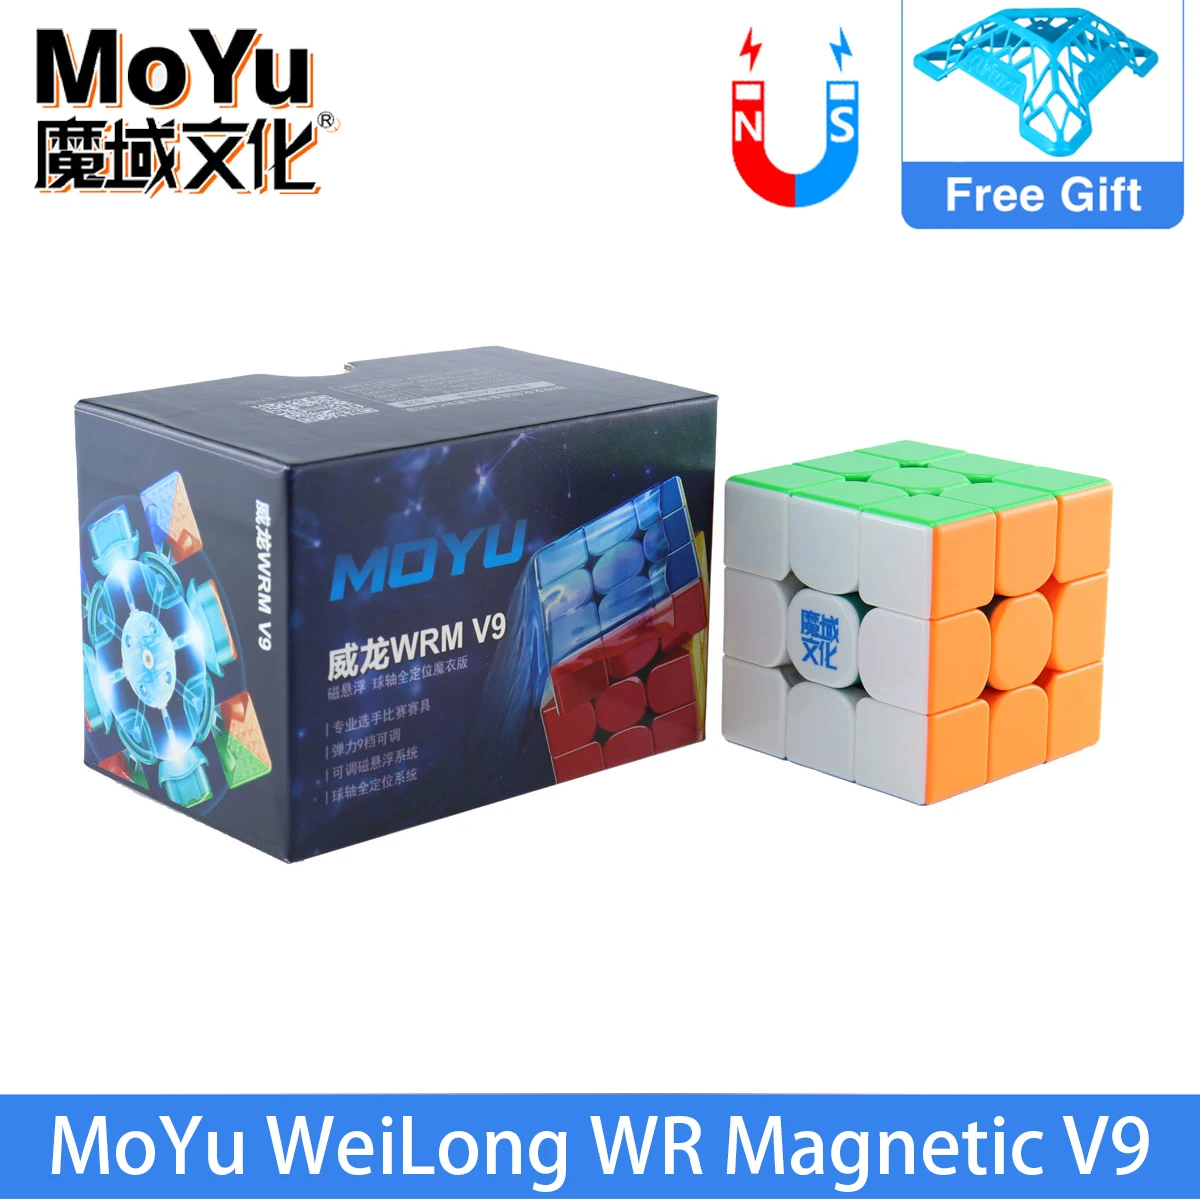 

MoYu Weilong WRM V9 3x3x3 Magnetic Magic Speed Cube Professional WR M V9 Maglev Ball-Core UV Cubo Magico Puzzle Toys